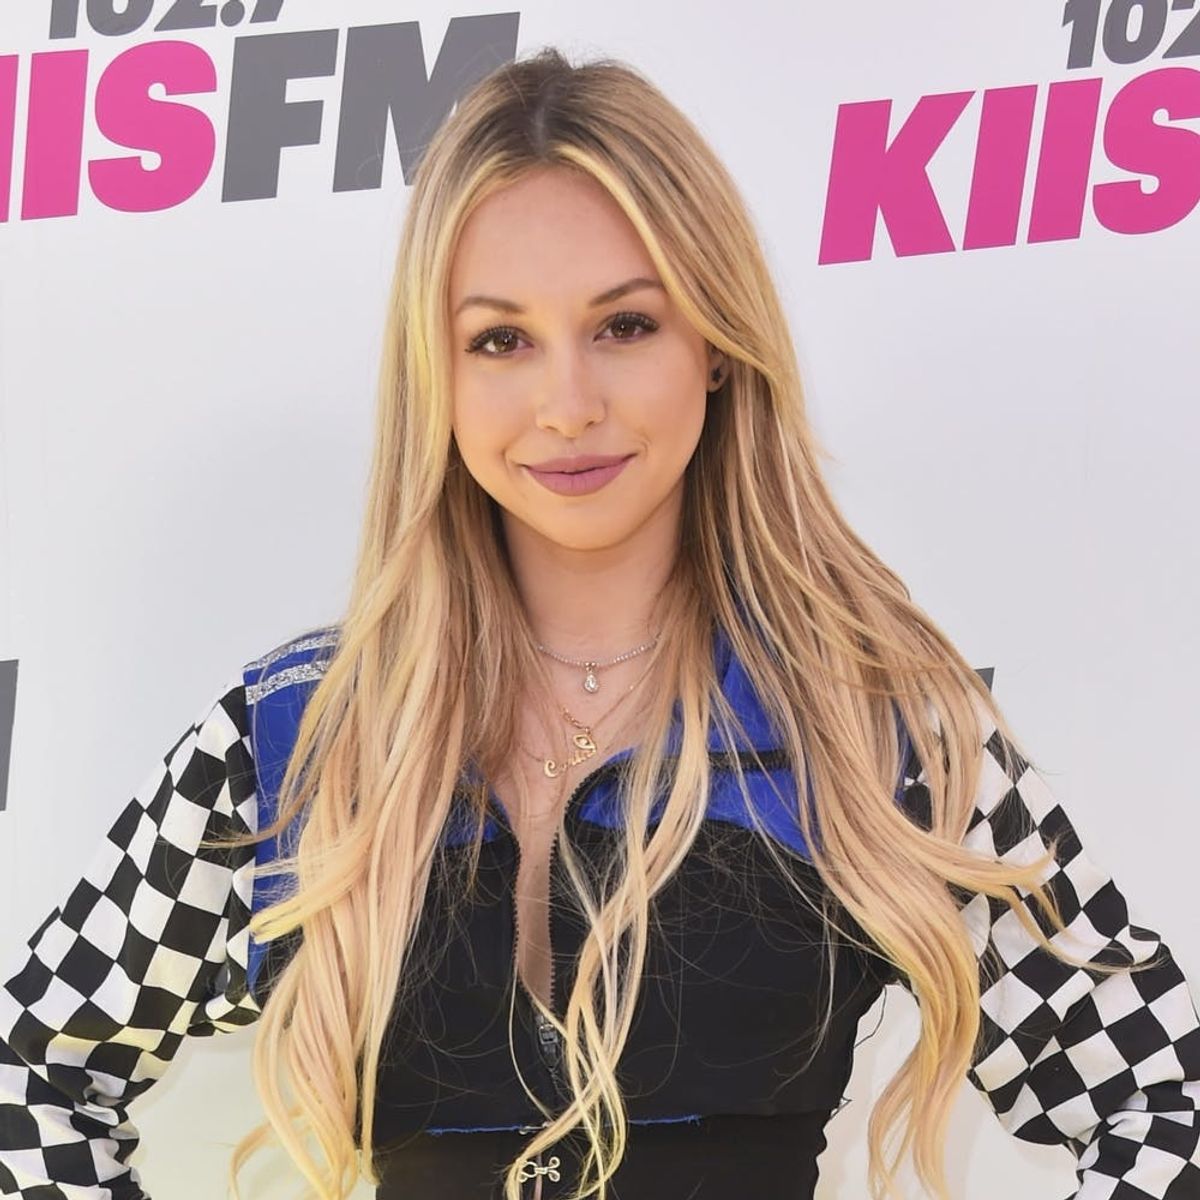 Bachelor in Paradise’s Corinne Olympios Is Hiring an Assistant!